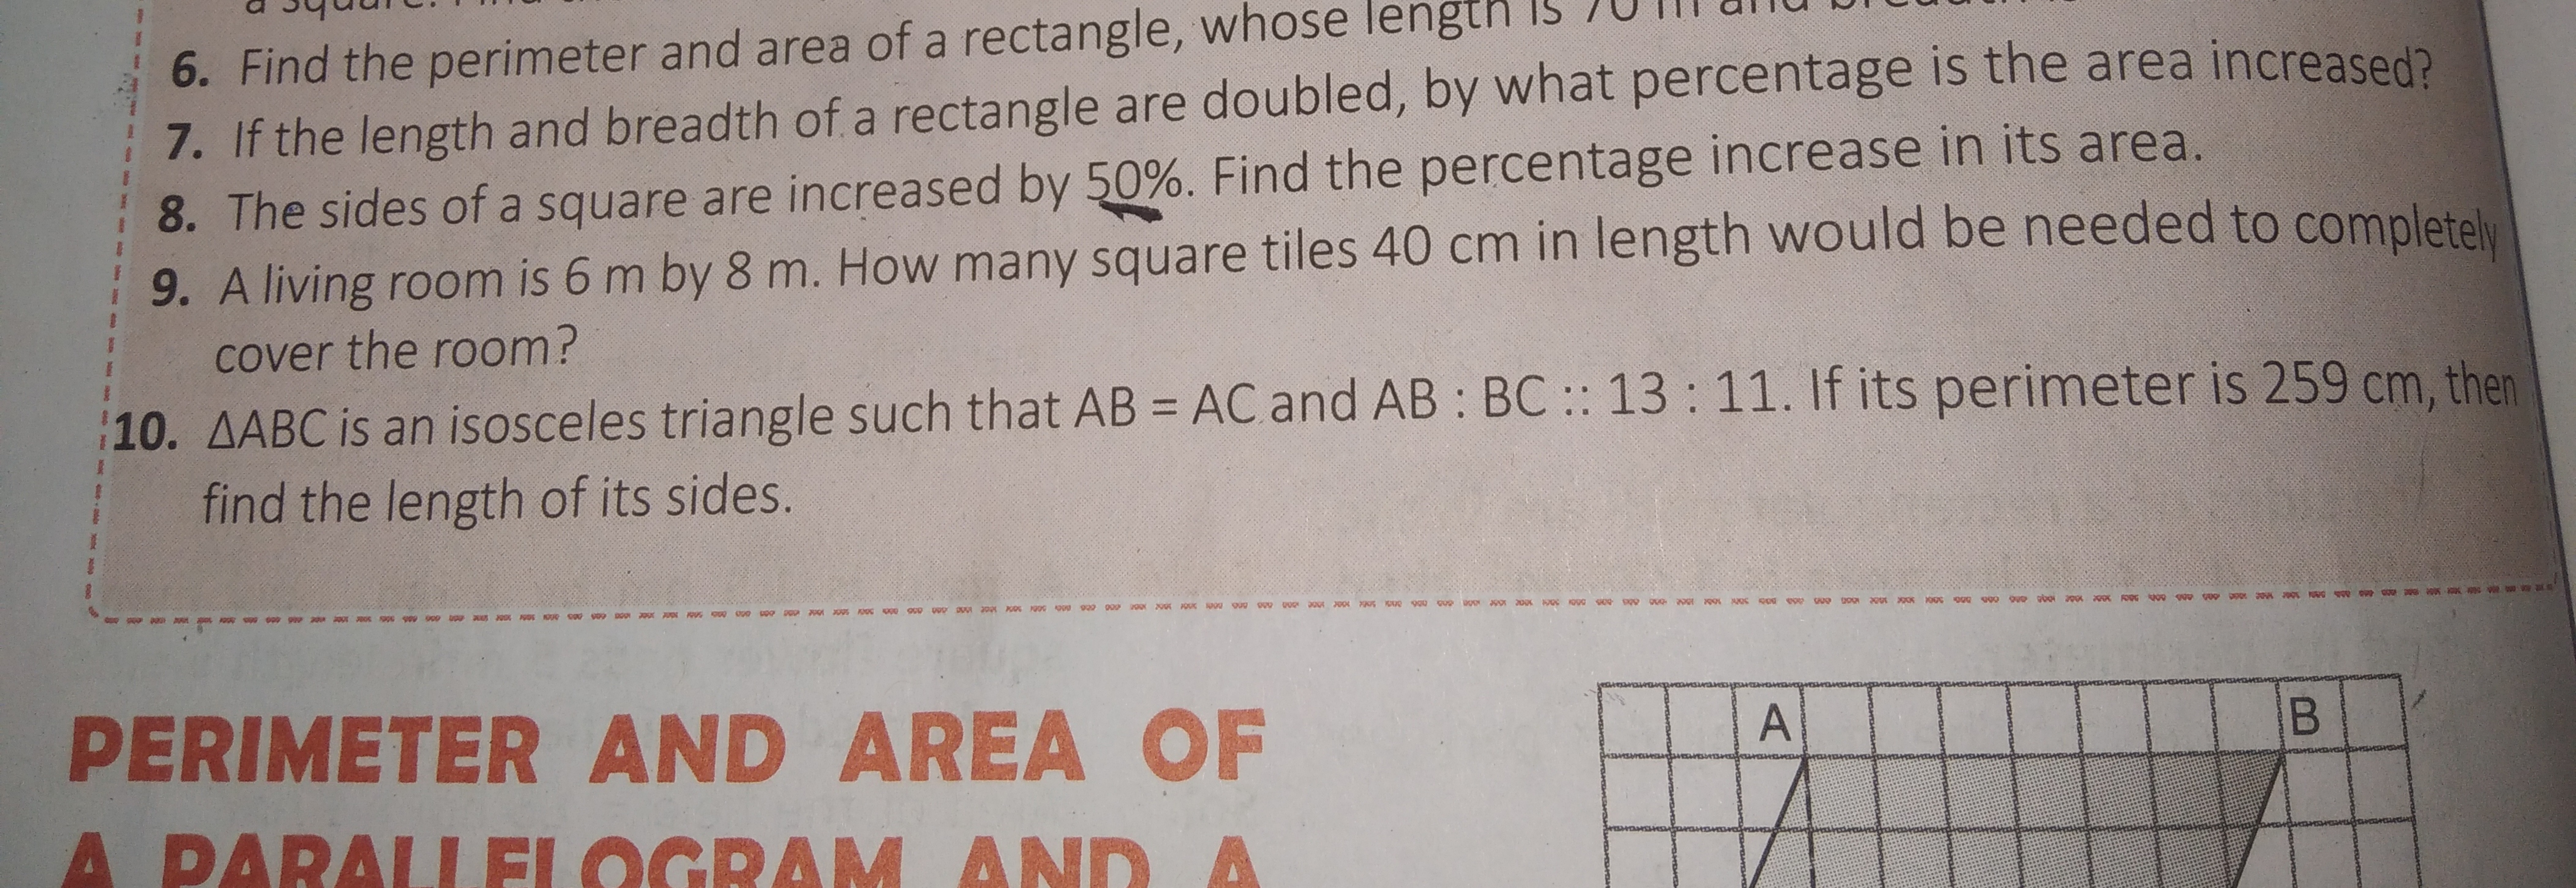 6. Find the perimeter and area of a rectangle, whose lengt
7. If the l